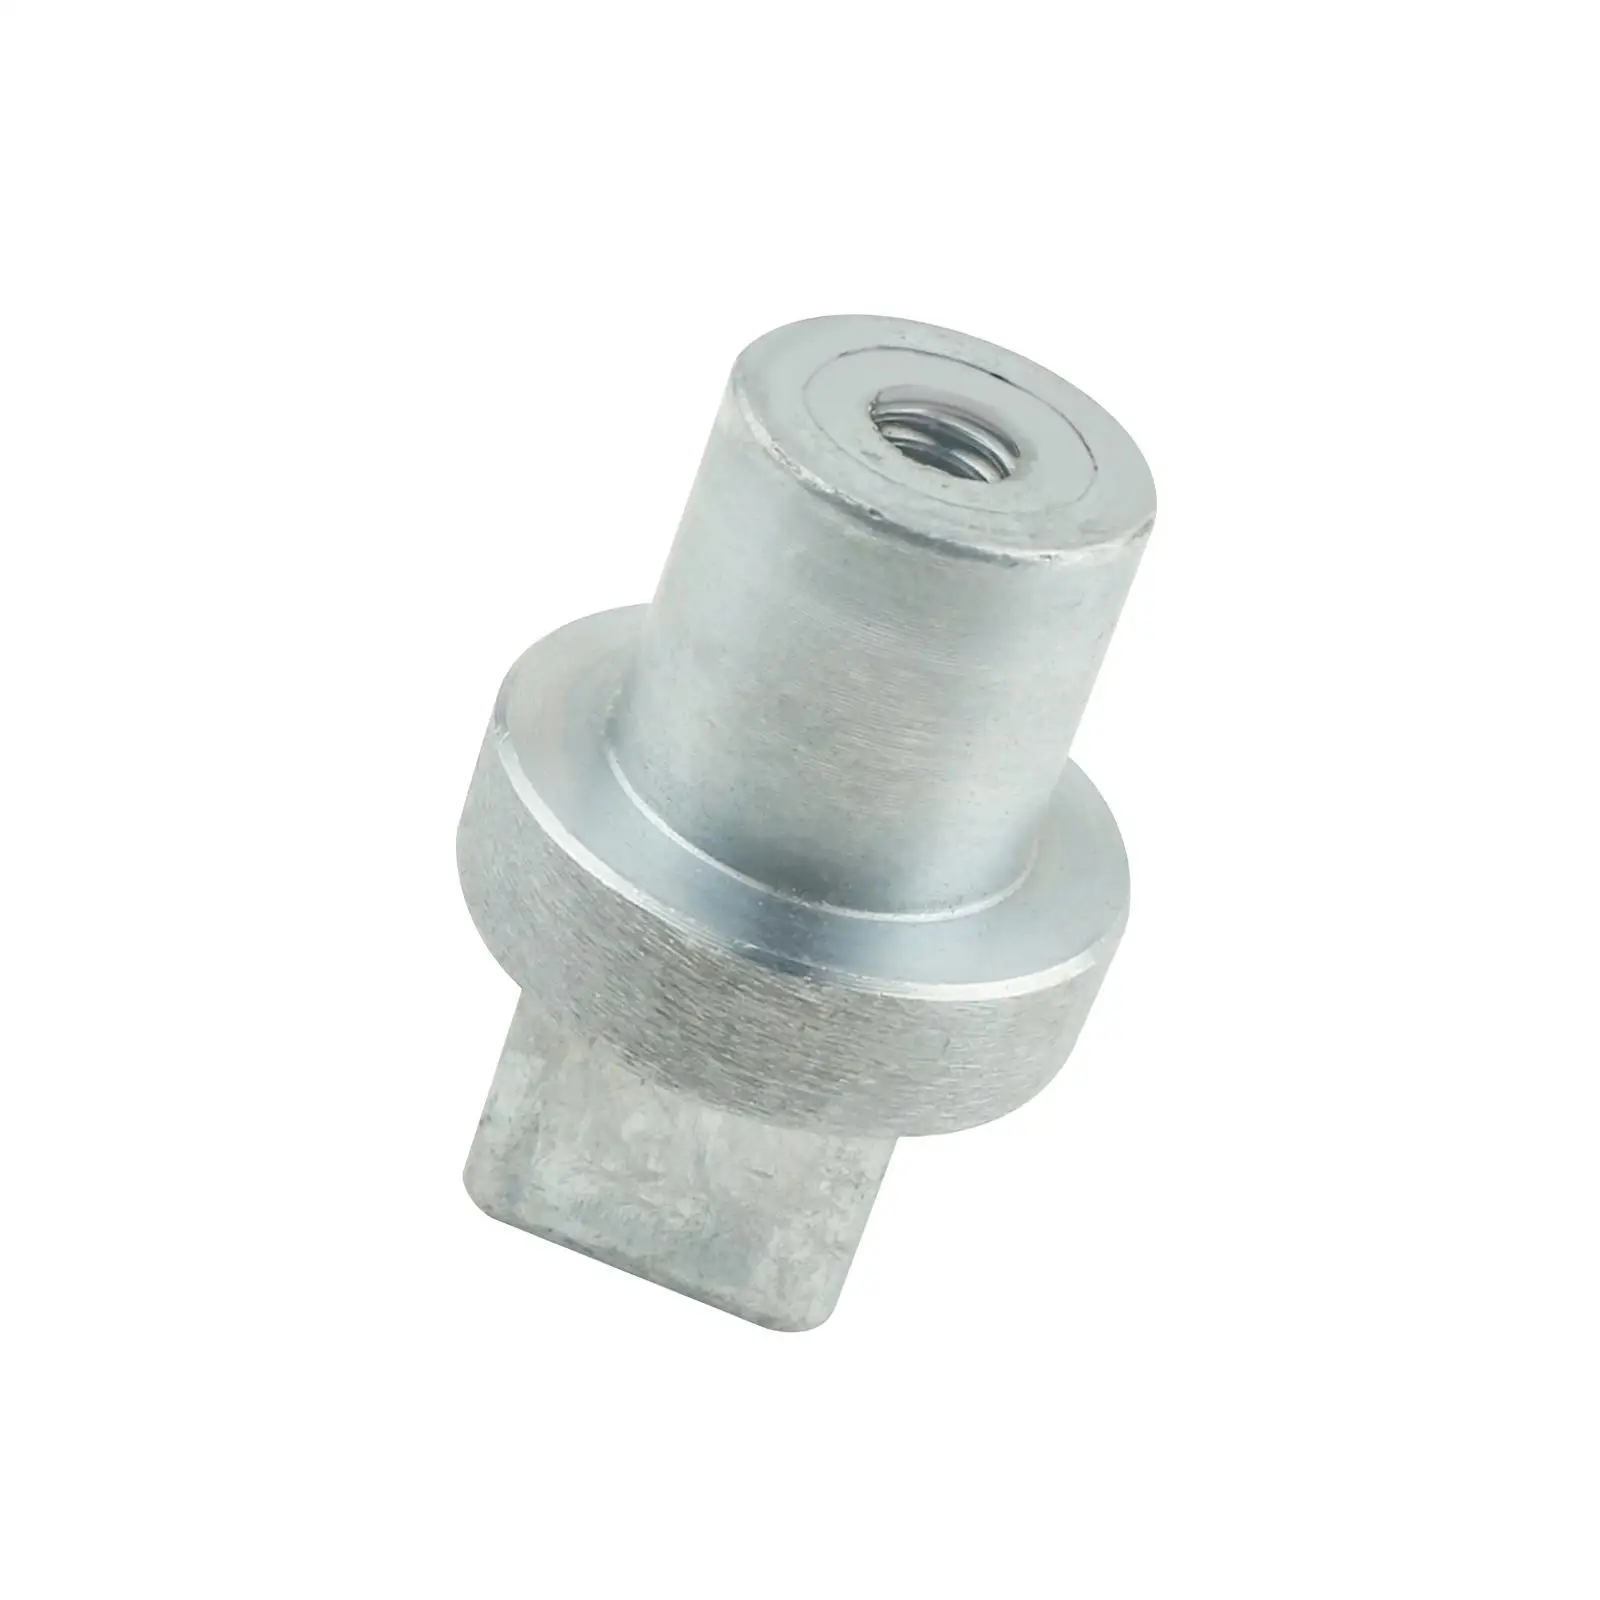 Outboard Engine Zinc Anode 67F-45251 Premium Accessories Marine Zinc Anode for Yamaha 4 Stroke 80HP 100HP 200 HP F80A F100A